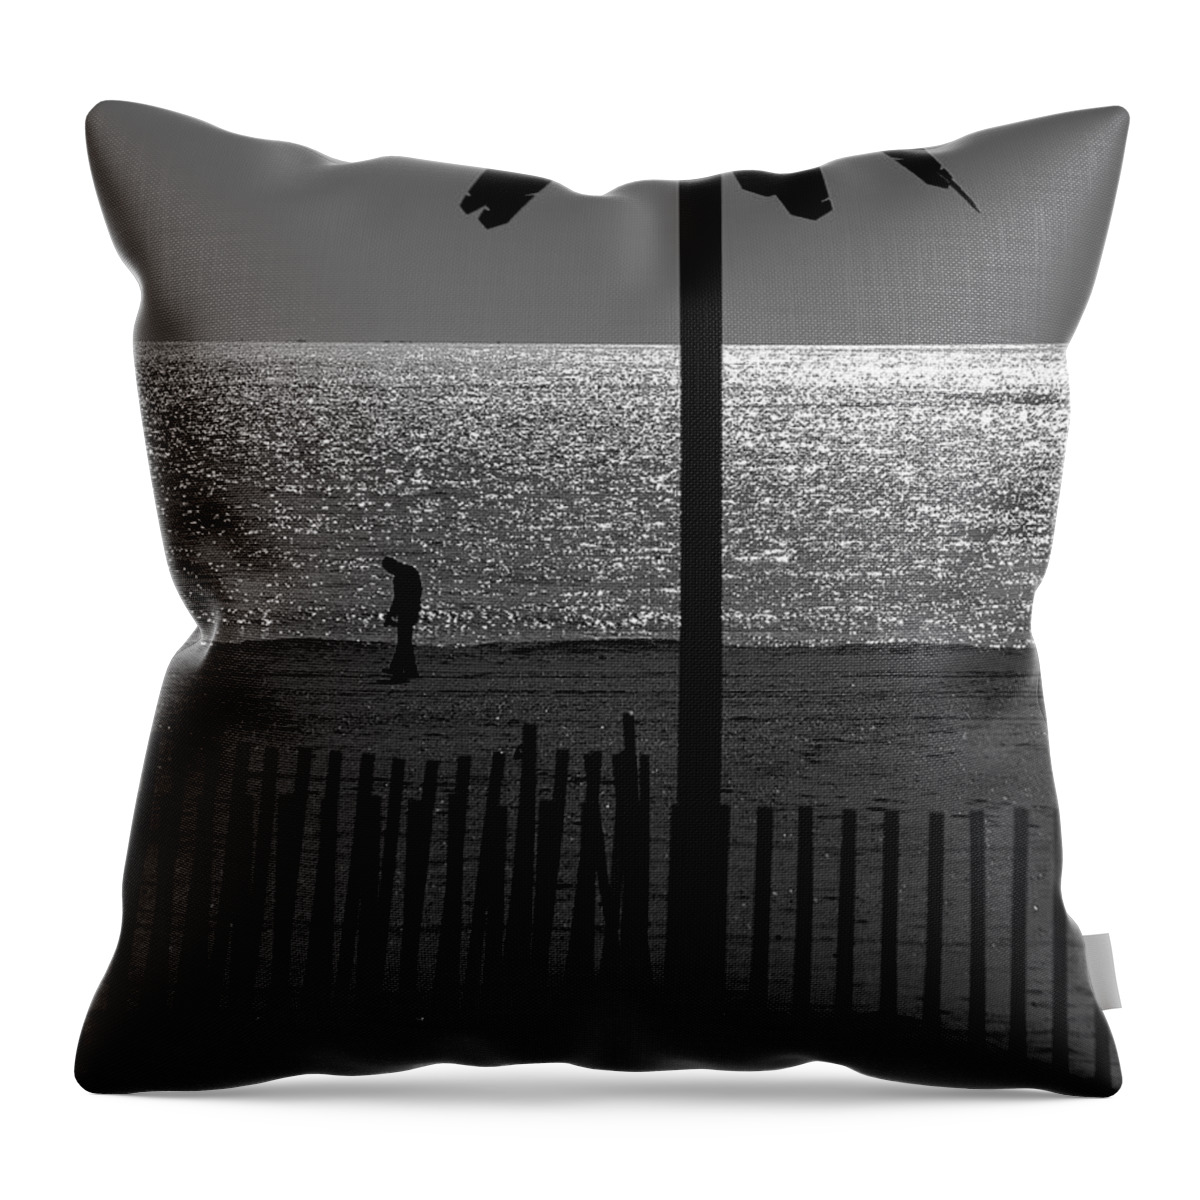 Coney Island Throw Pillow featuring the photograph Coney Island 1 by Steven Richman